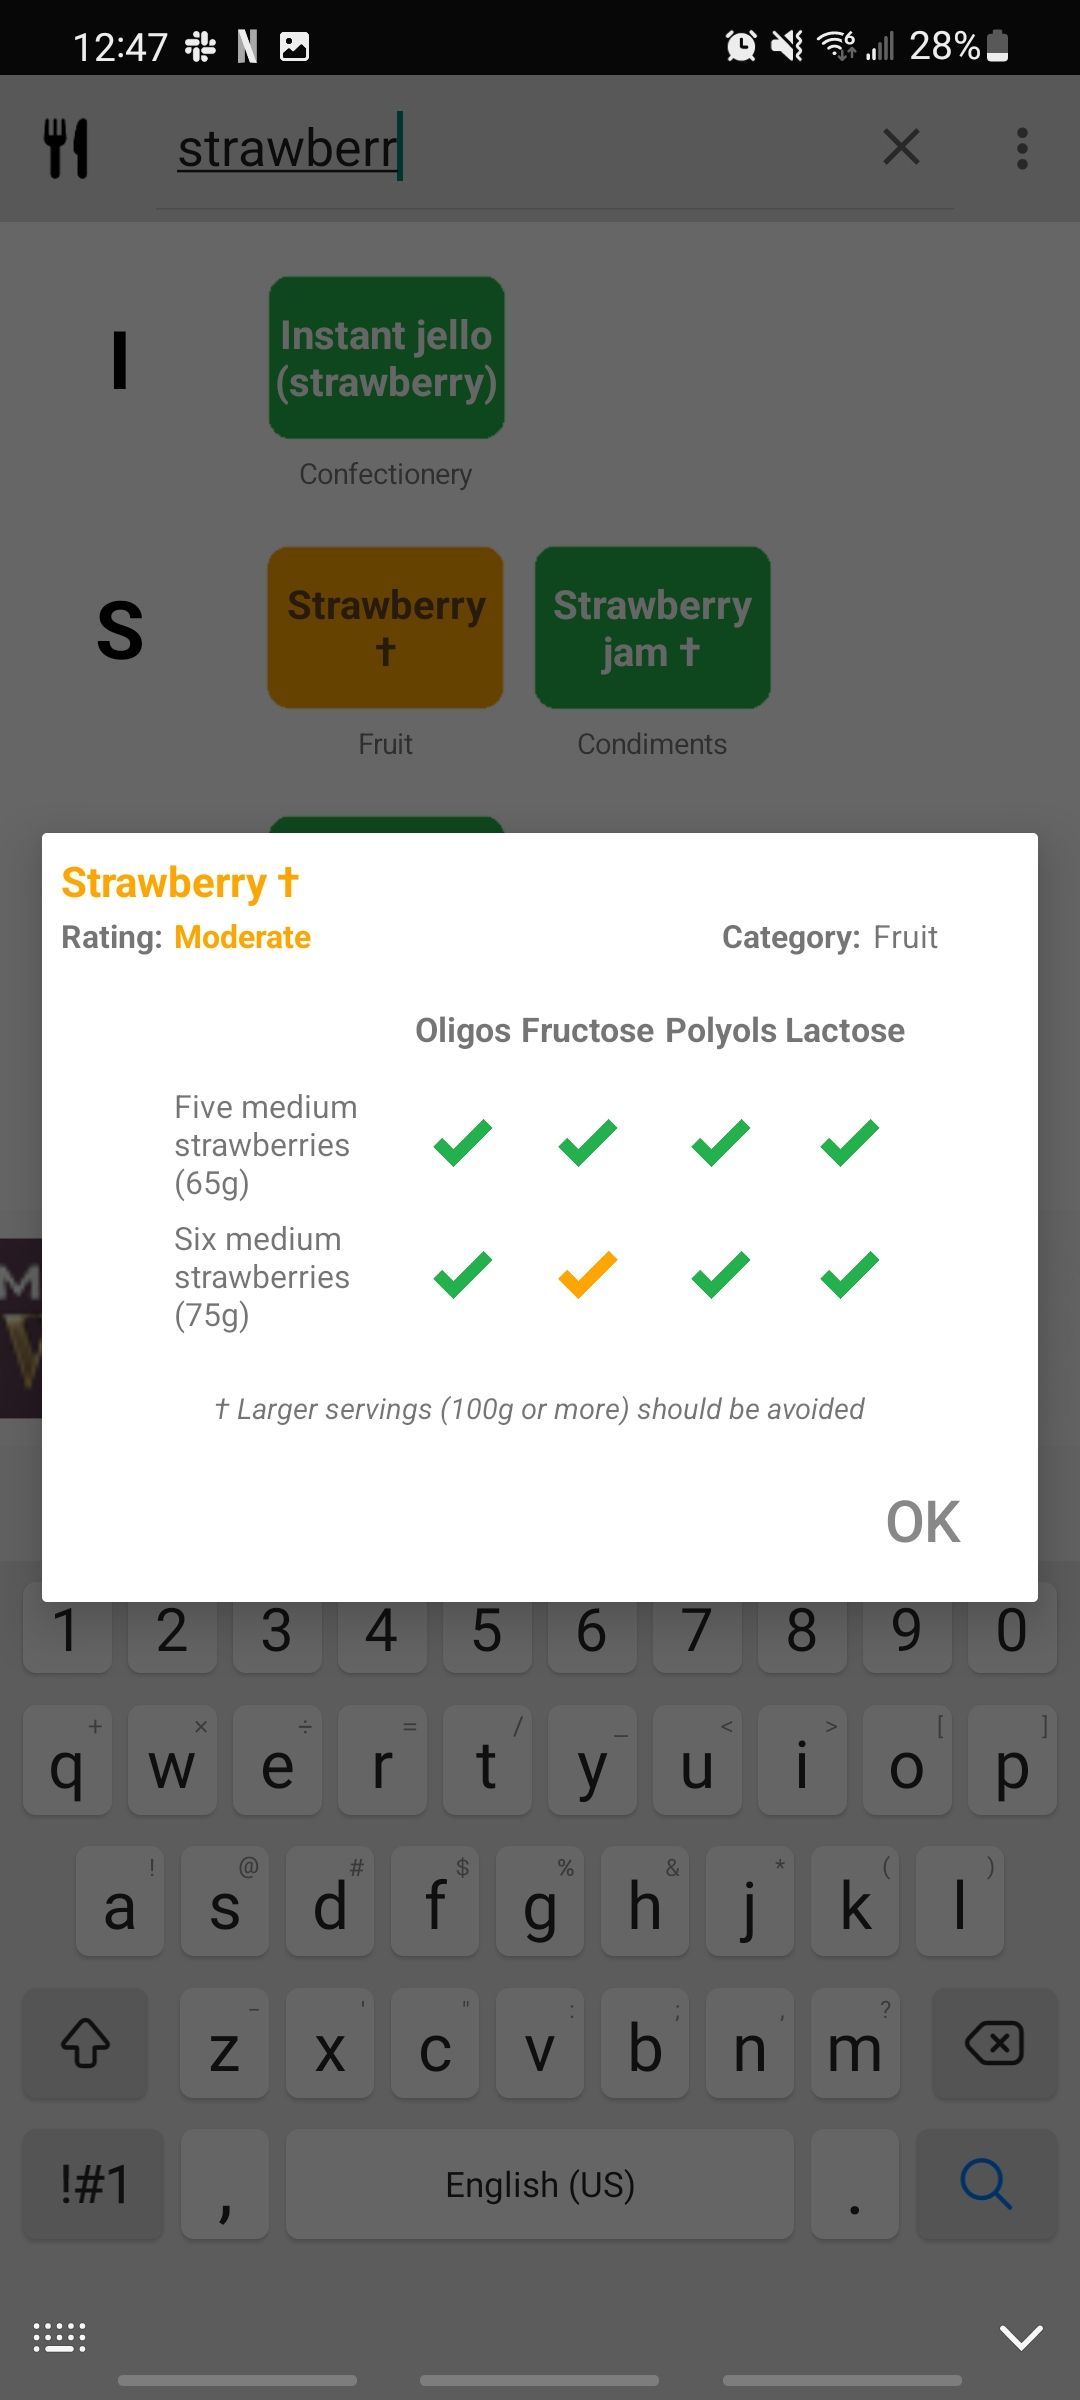 fodmap a to z app showing information about strawberries